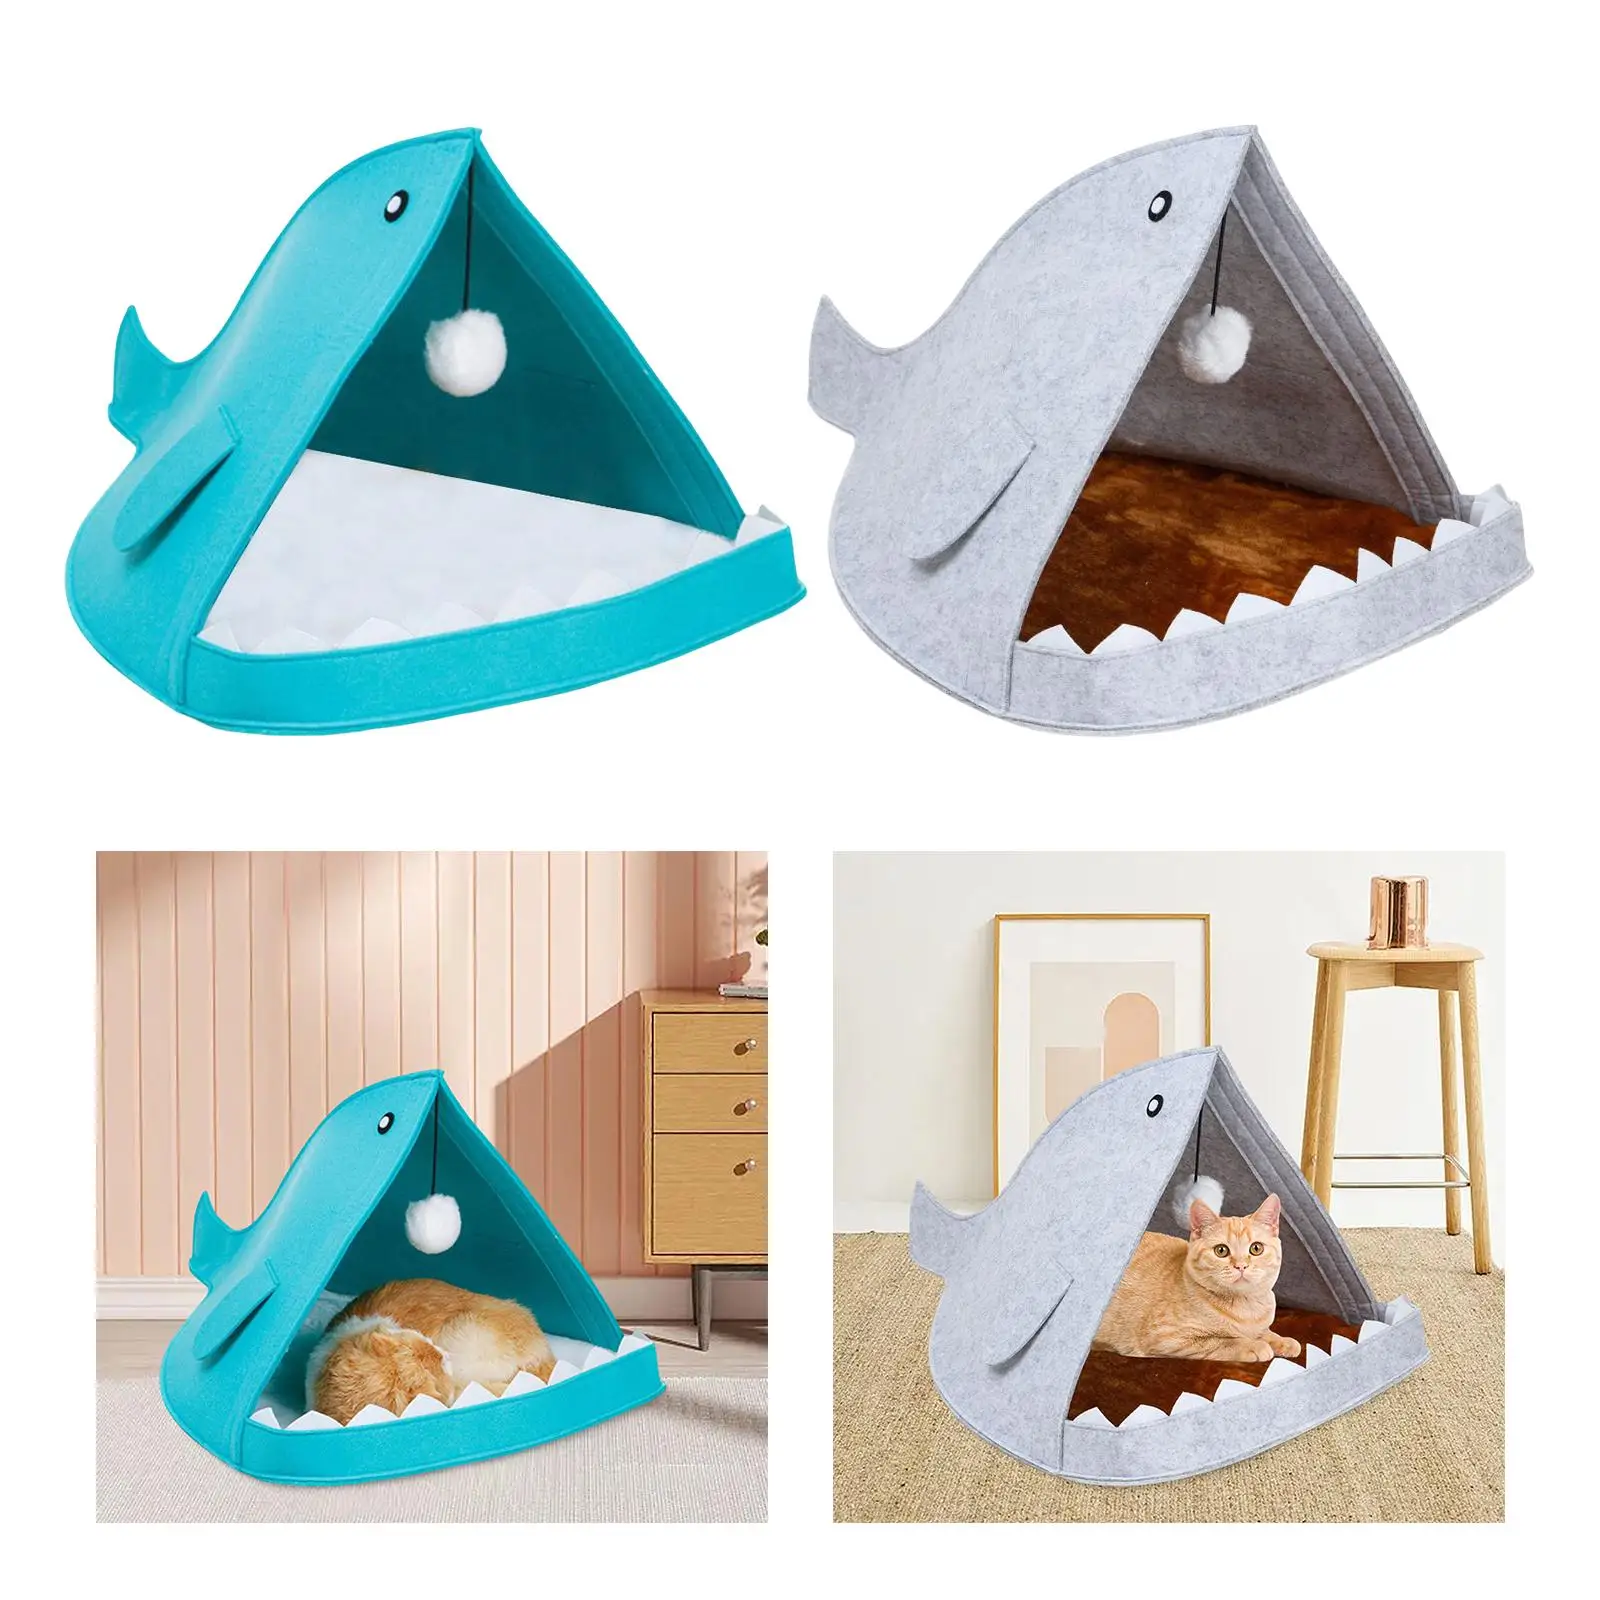 Felt Cat Beds for Indoor Cats Soft Pet Bed Small Kitten Bed Shark Shaped for Small Animal